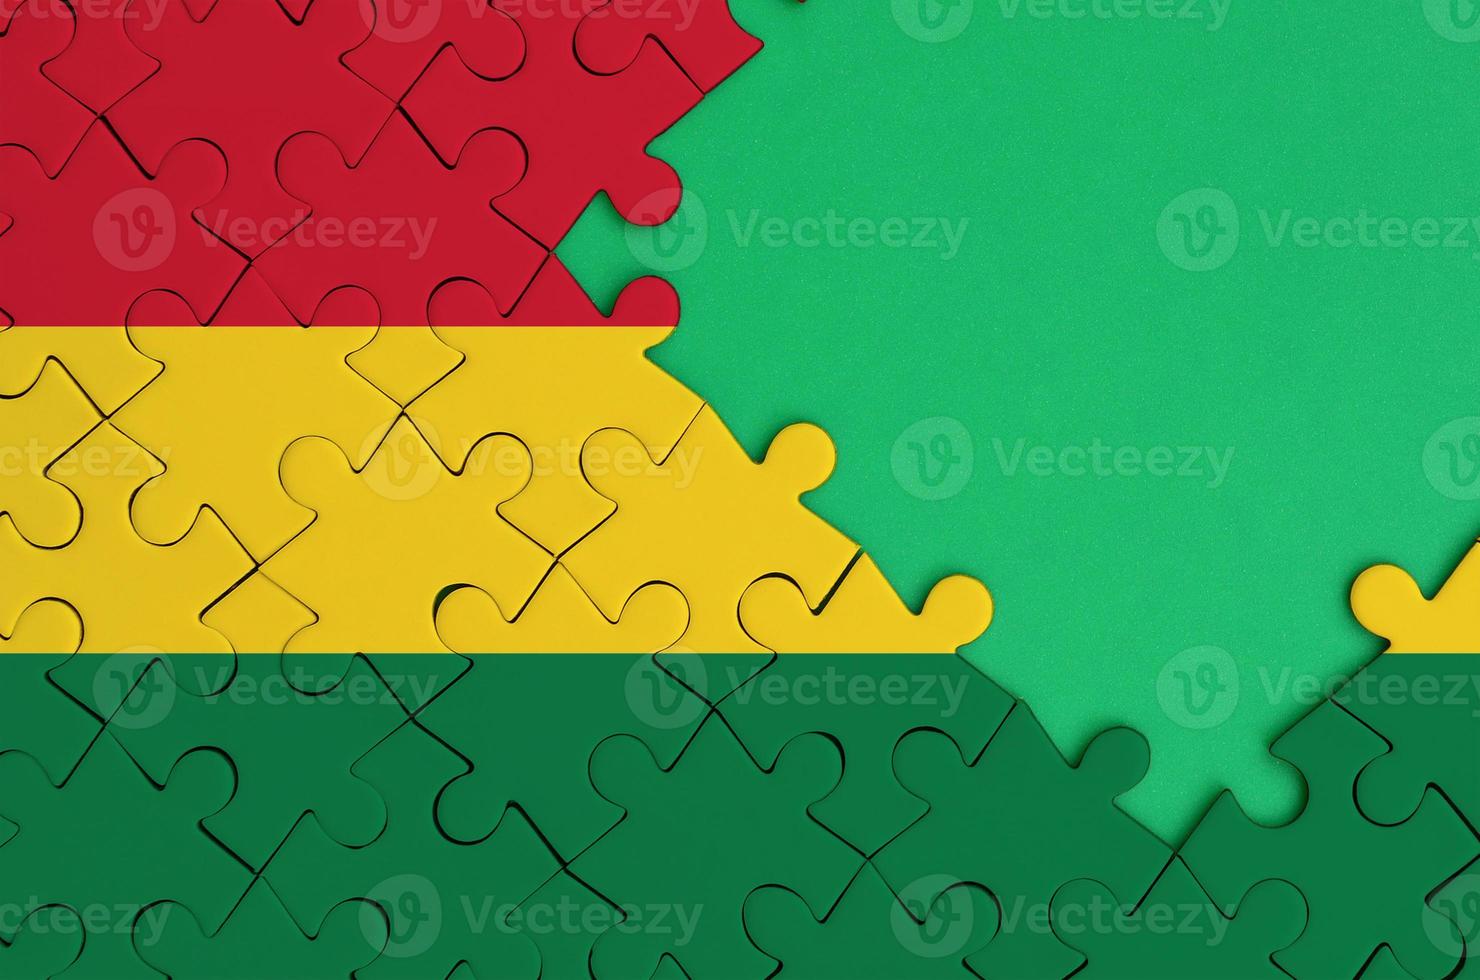 Bolivia flag  is depicted on a completed jigsaw puzzle with free green copy space on the right side photo